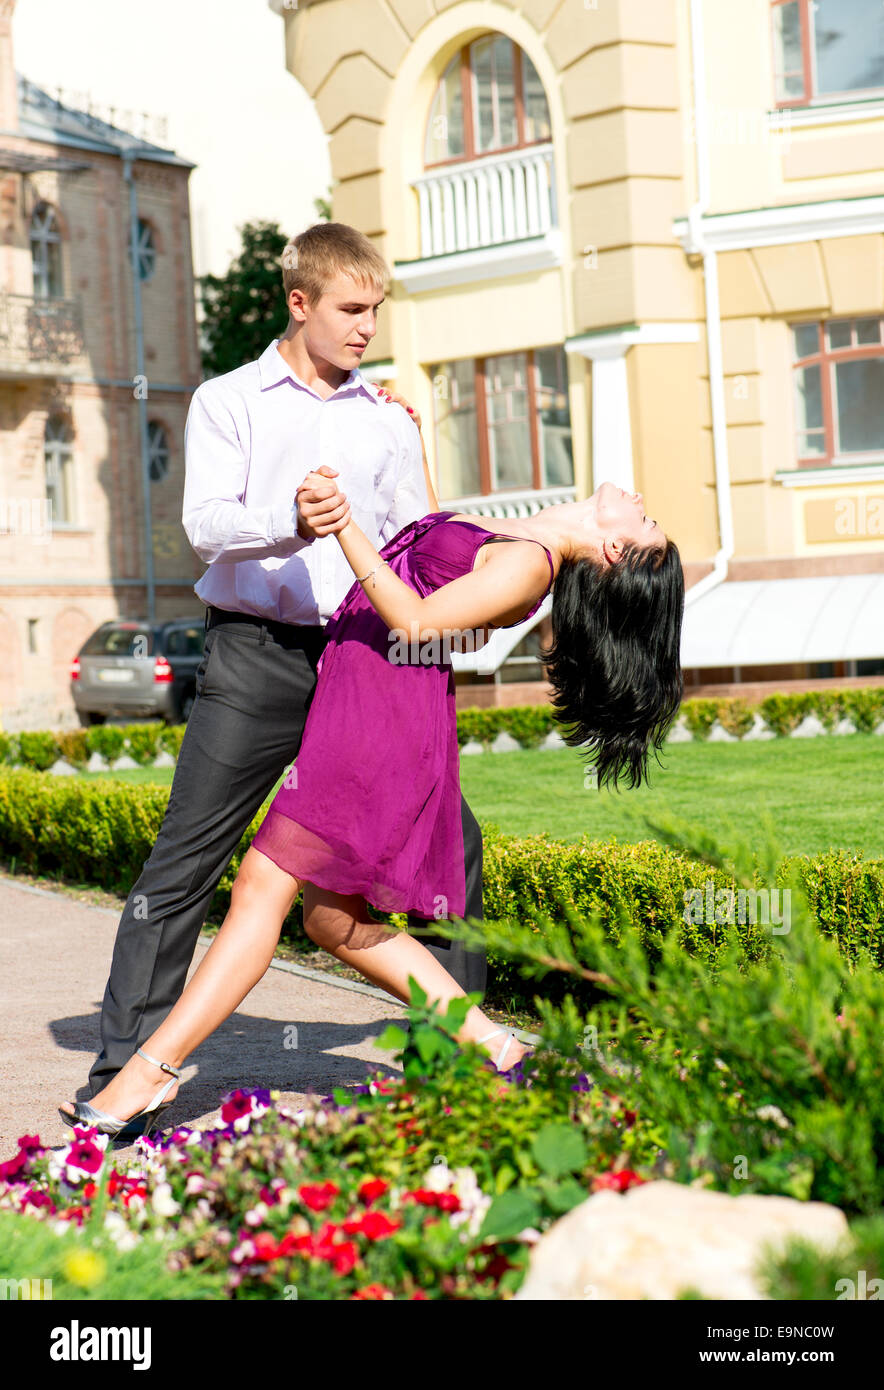 Young couple dancing on street Banque D'Images